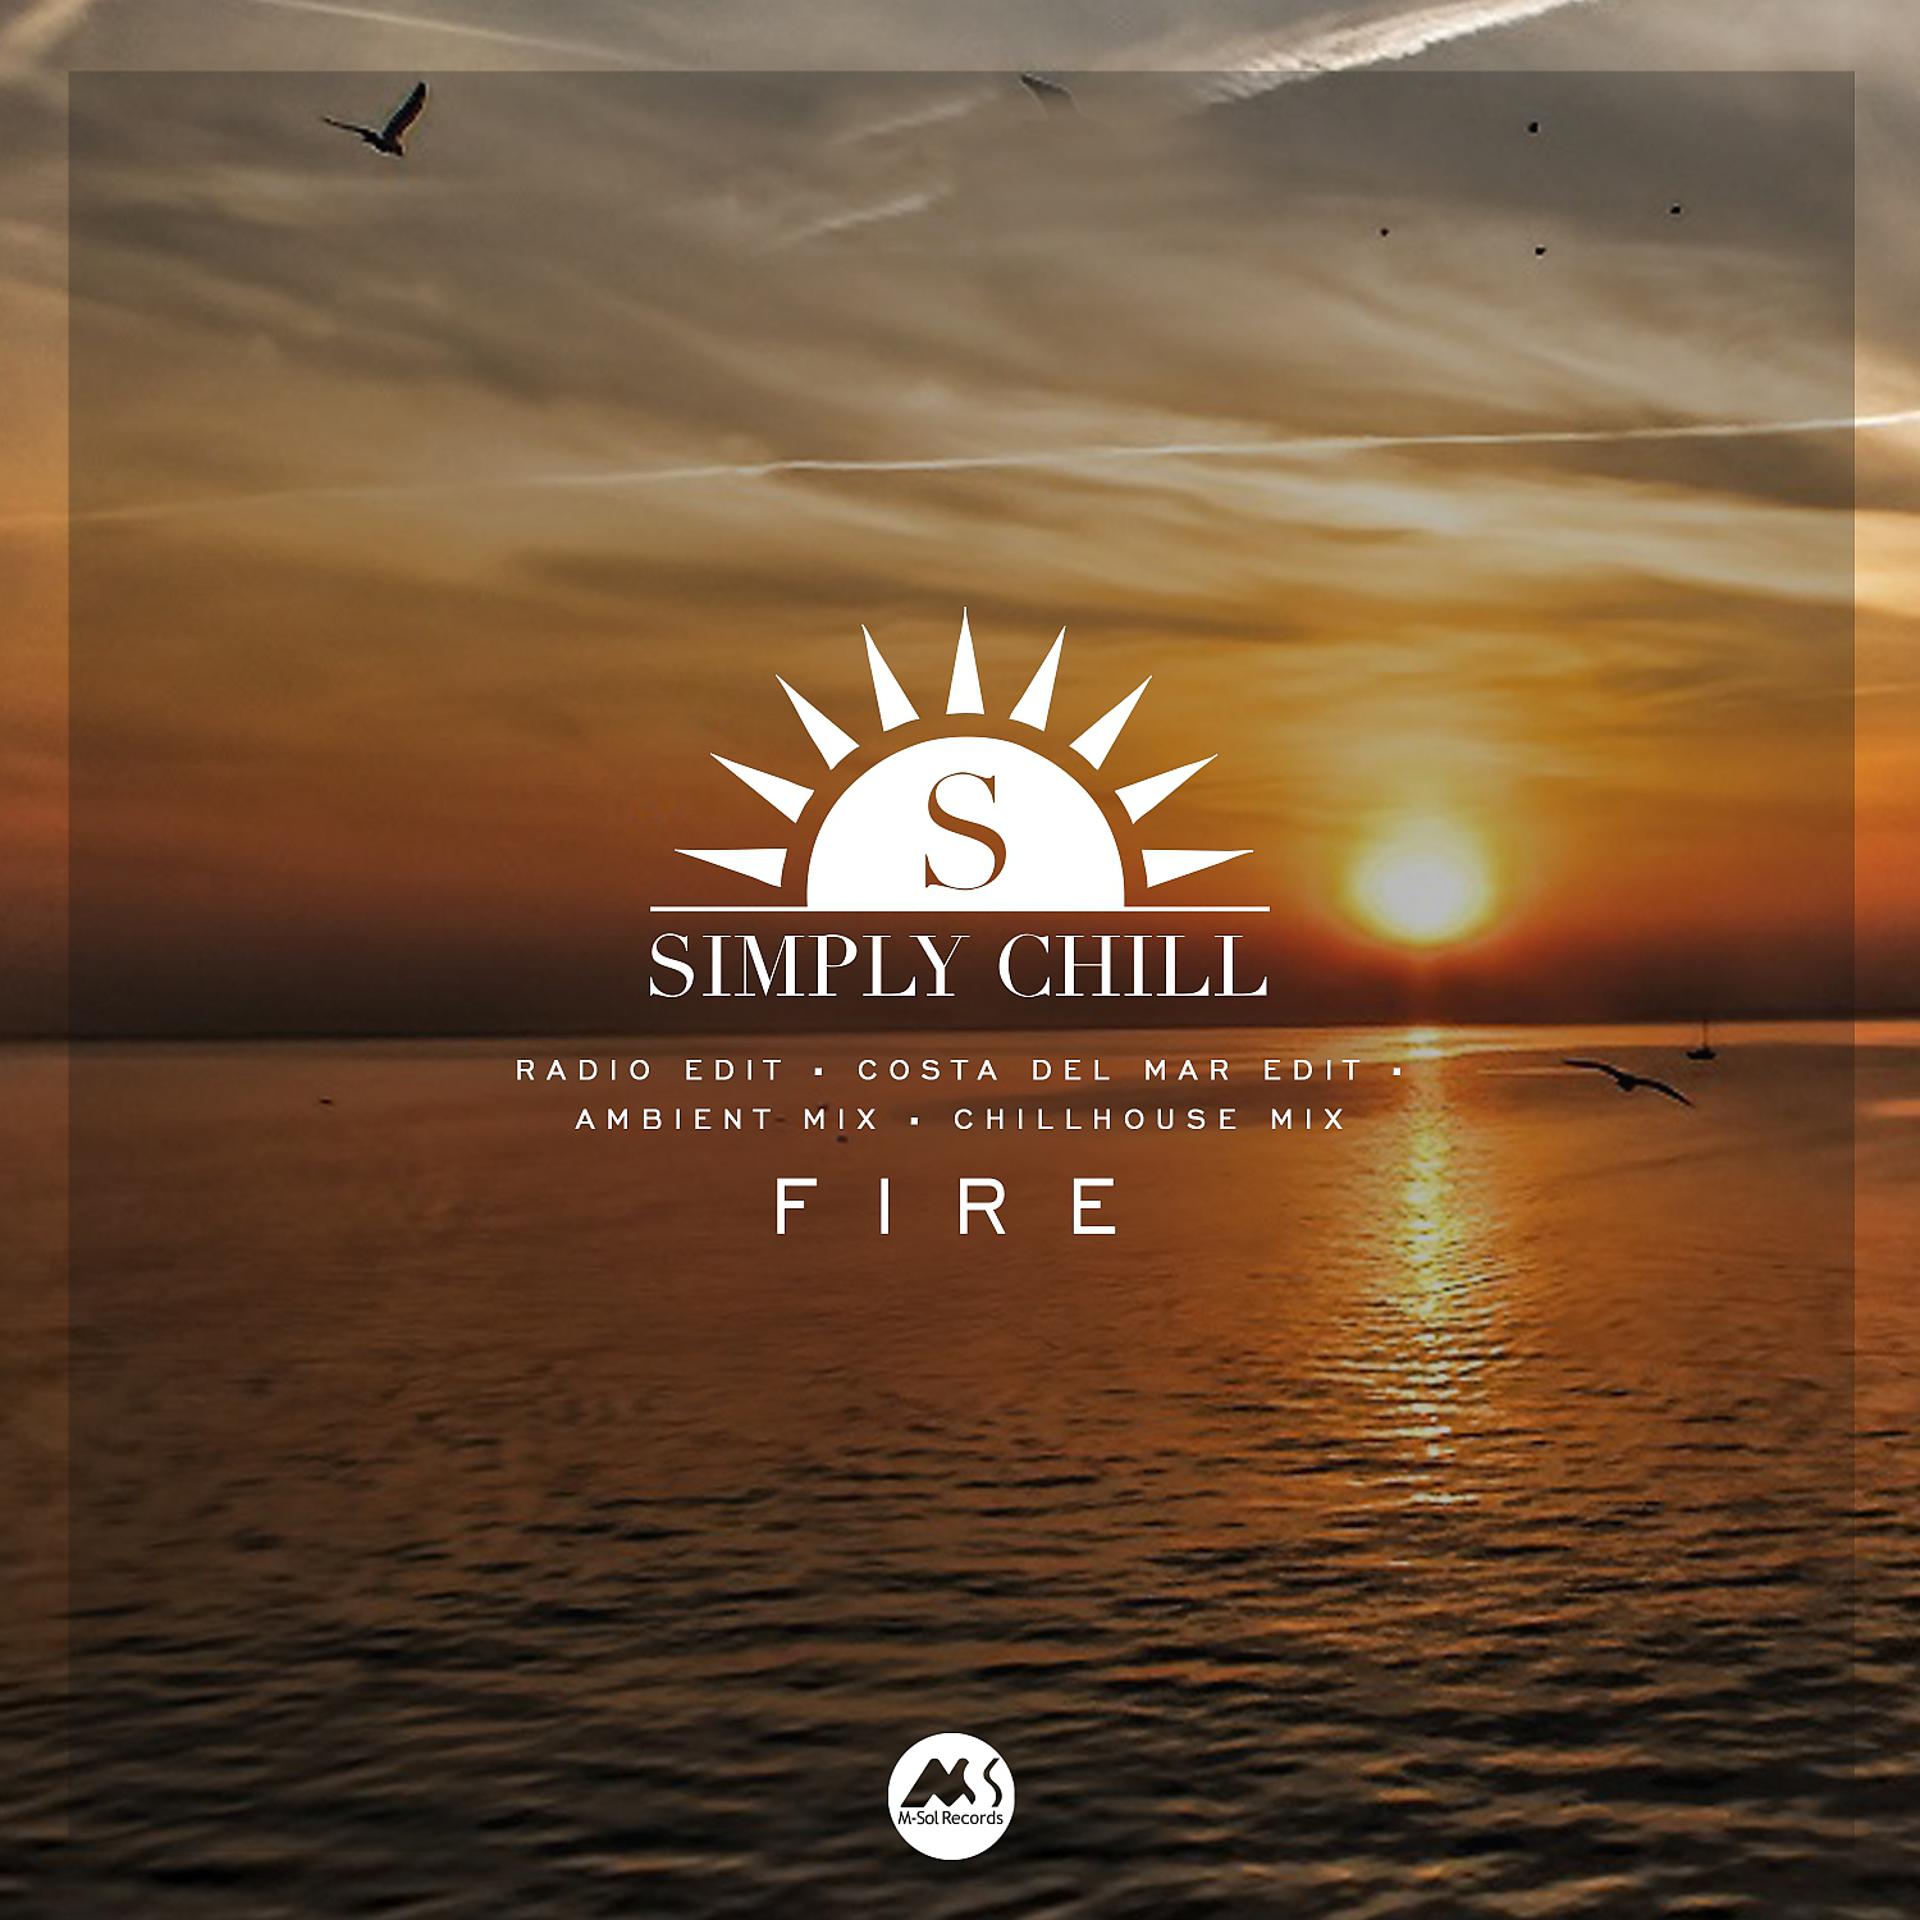 Chilly simply. Simple Chill. Fire simple.